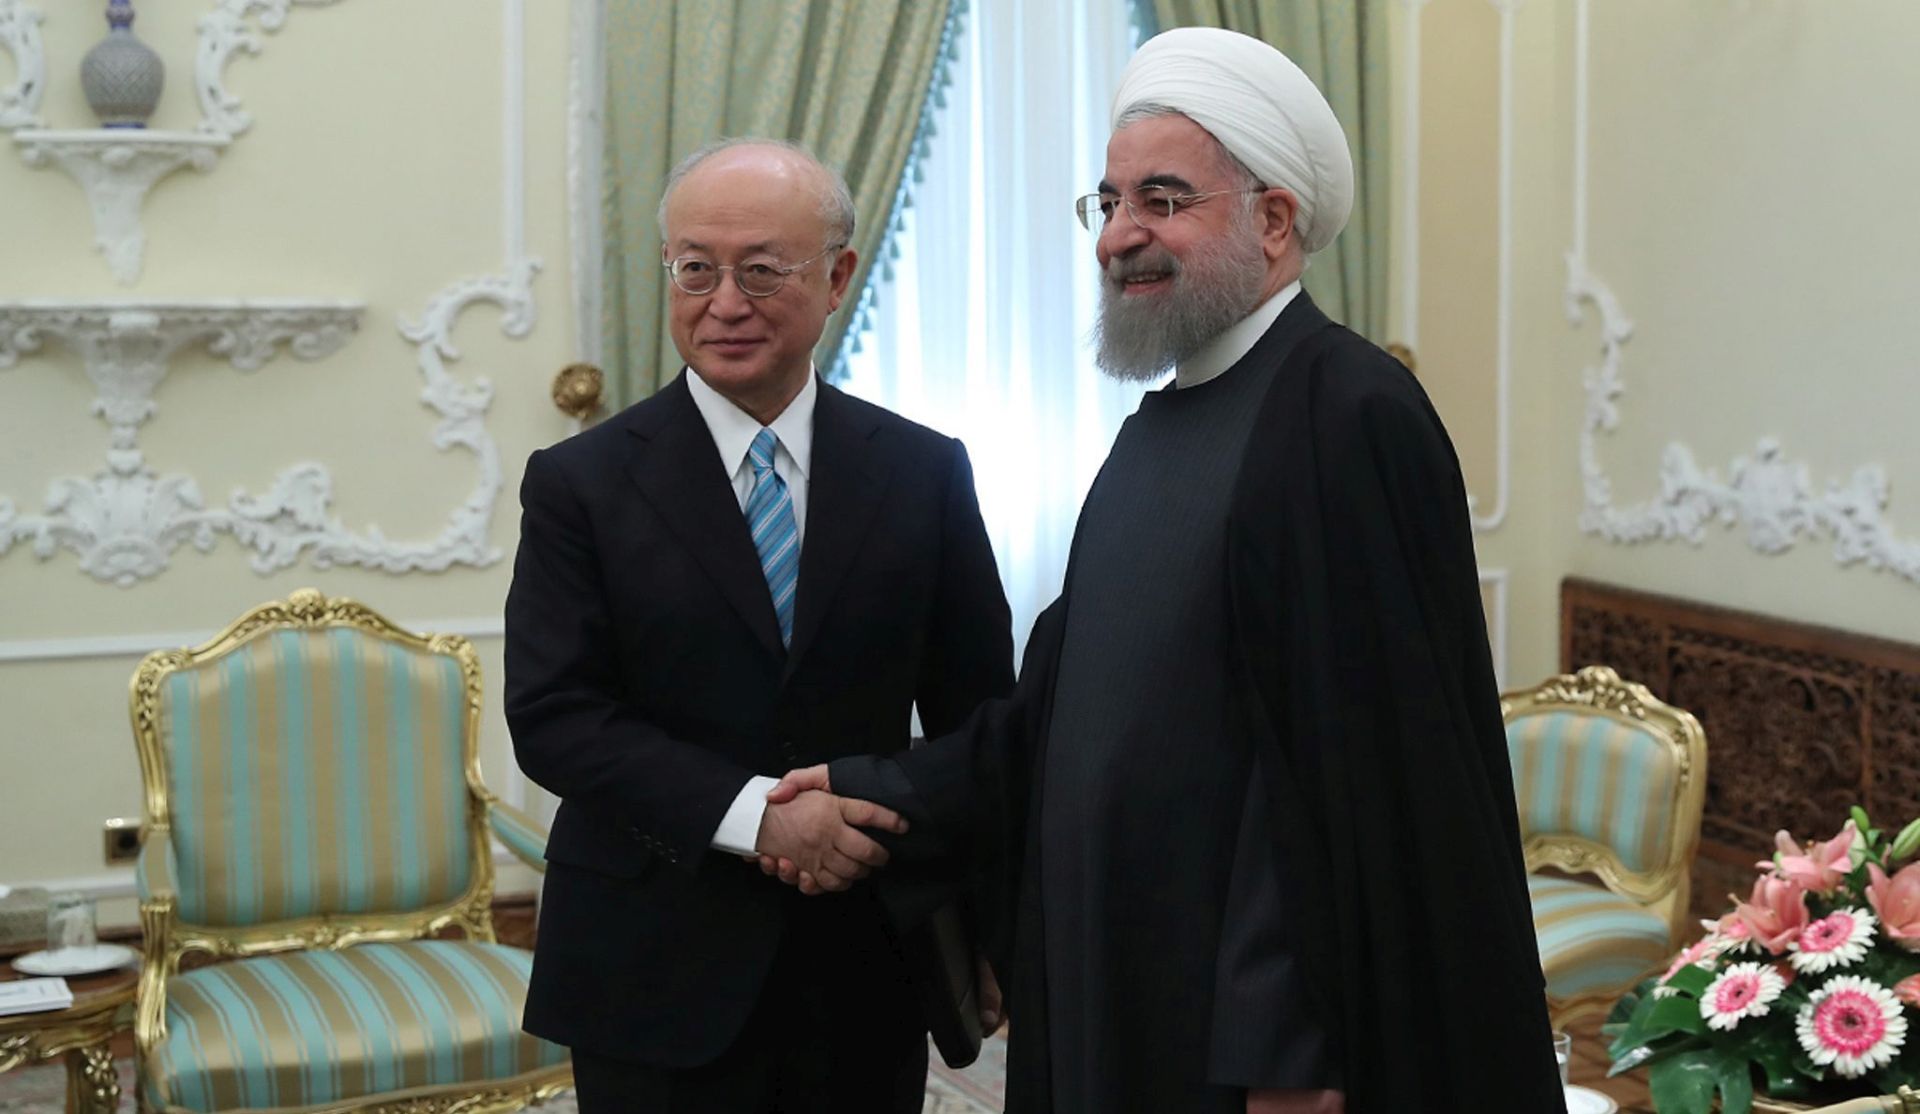 epa05680407 A handout picture made available by the Iranian President's official website on 18 December 2016 of Iranian President Hassan Rouhani (R) welcoming the Director General of the International Atomic Energy Agency (IAEA), Yukiya Amano (L) at the presidential office, in Tehran, Iran, 18 December 2016. Media reported that Amano is in Tehran to meet with Iranian officials about the latest update about Iran's nuclear deal with world powers.  EPA/PRESIDENTIAL OFFICIAL WEBSITE / HANDOUT  HANDOUT EDITORIAL USE ONLY/NO SALES